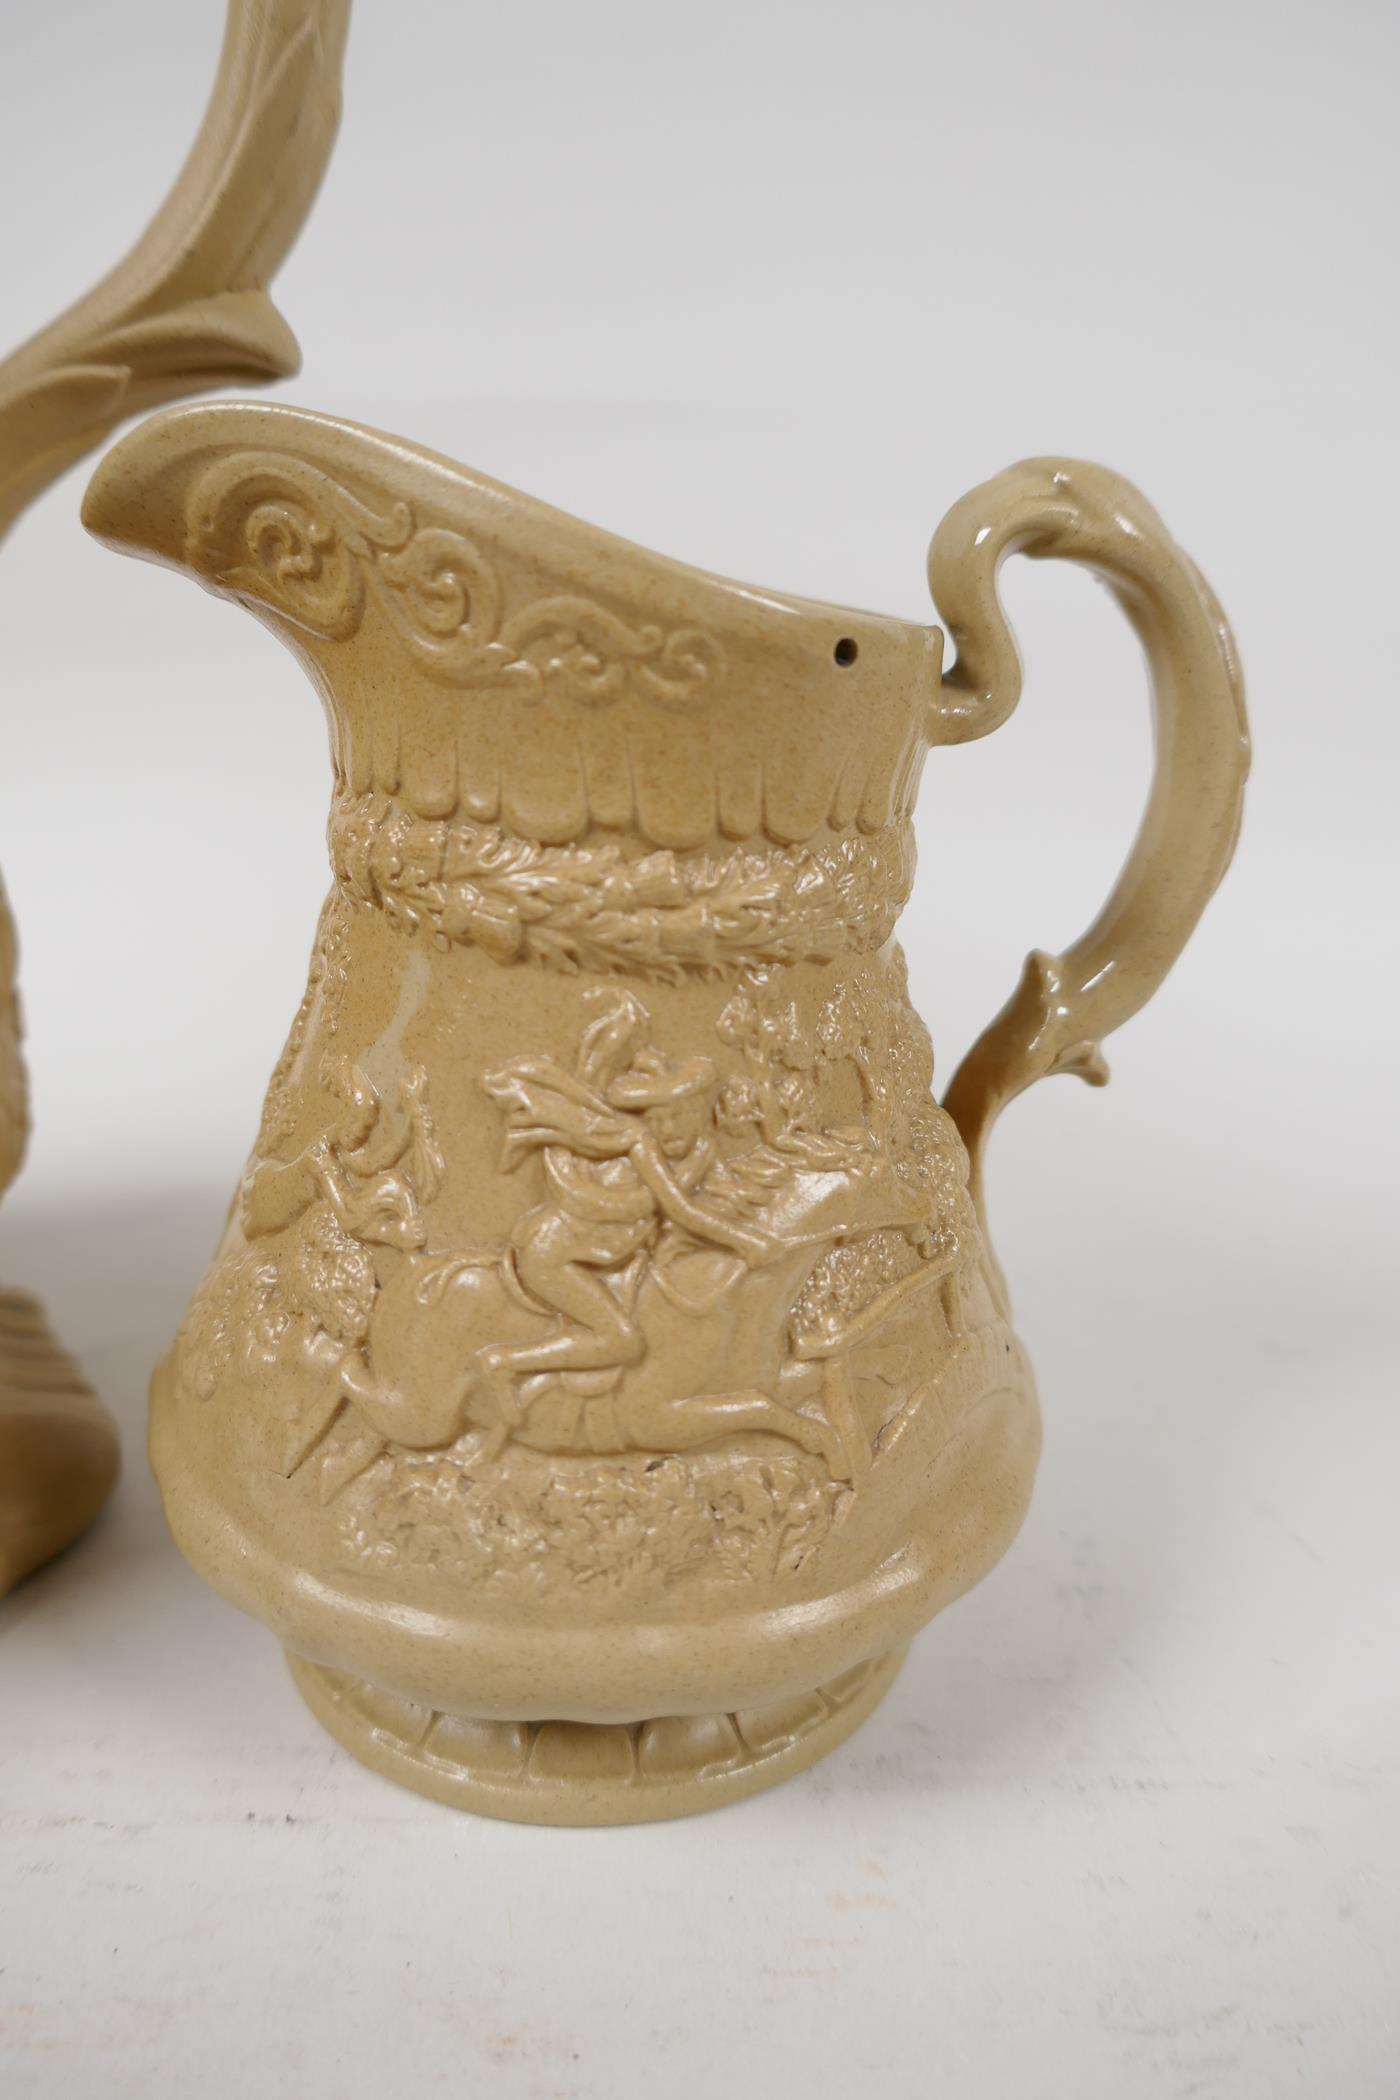 A C19th stoneware jug moulded with figures and fruiting vines, with sandstone matt glaze and - Image 3 of 6